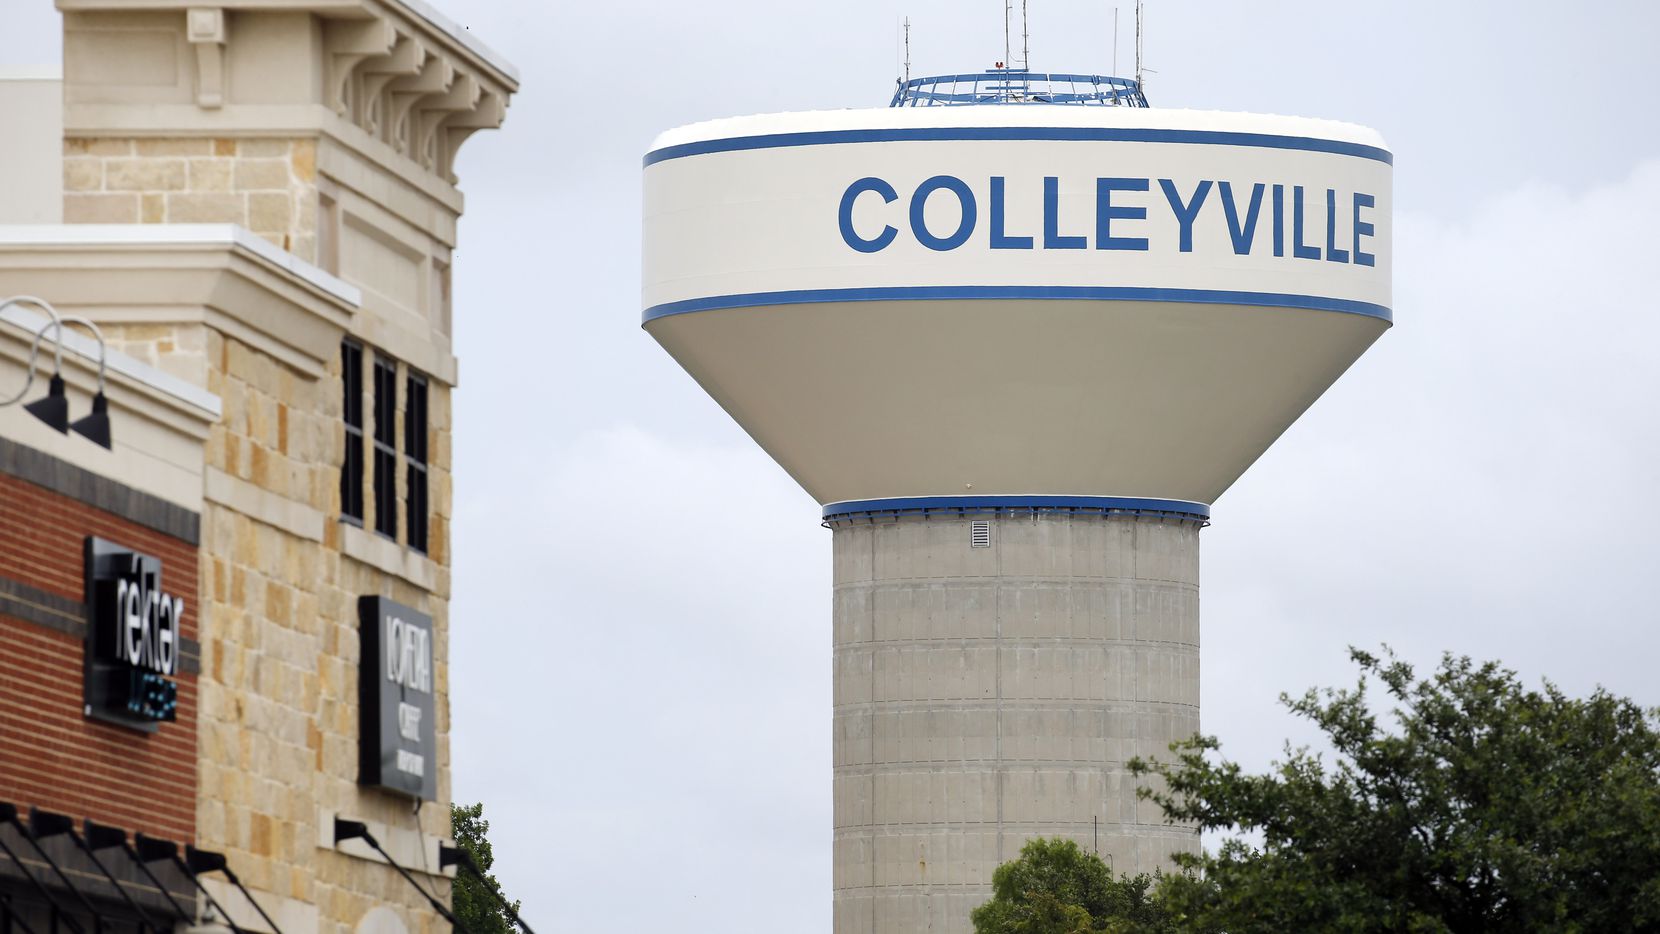 A road construction project starting soon in Colleyville is estimated to take longer than a year to complete.